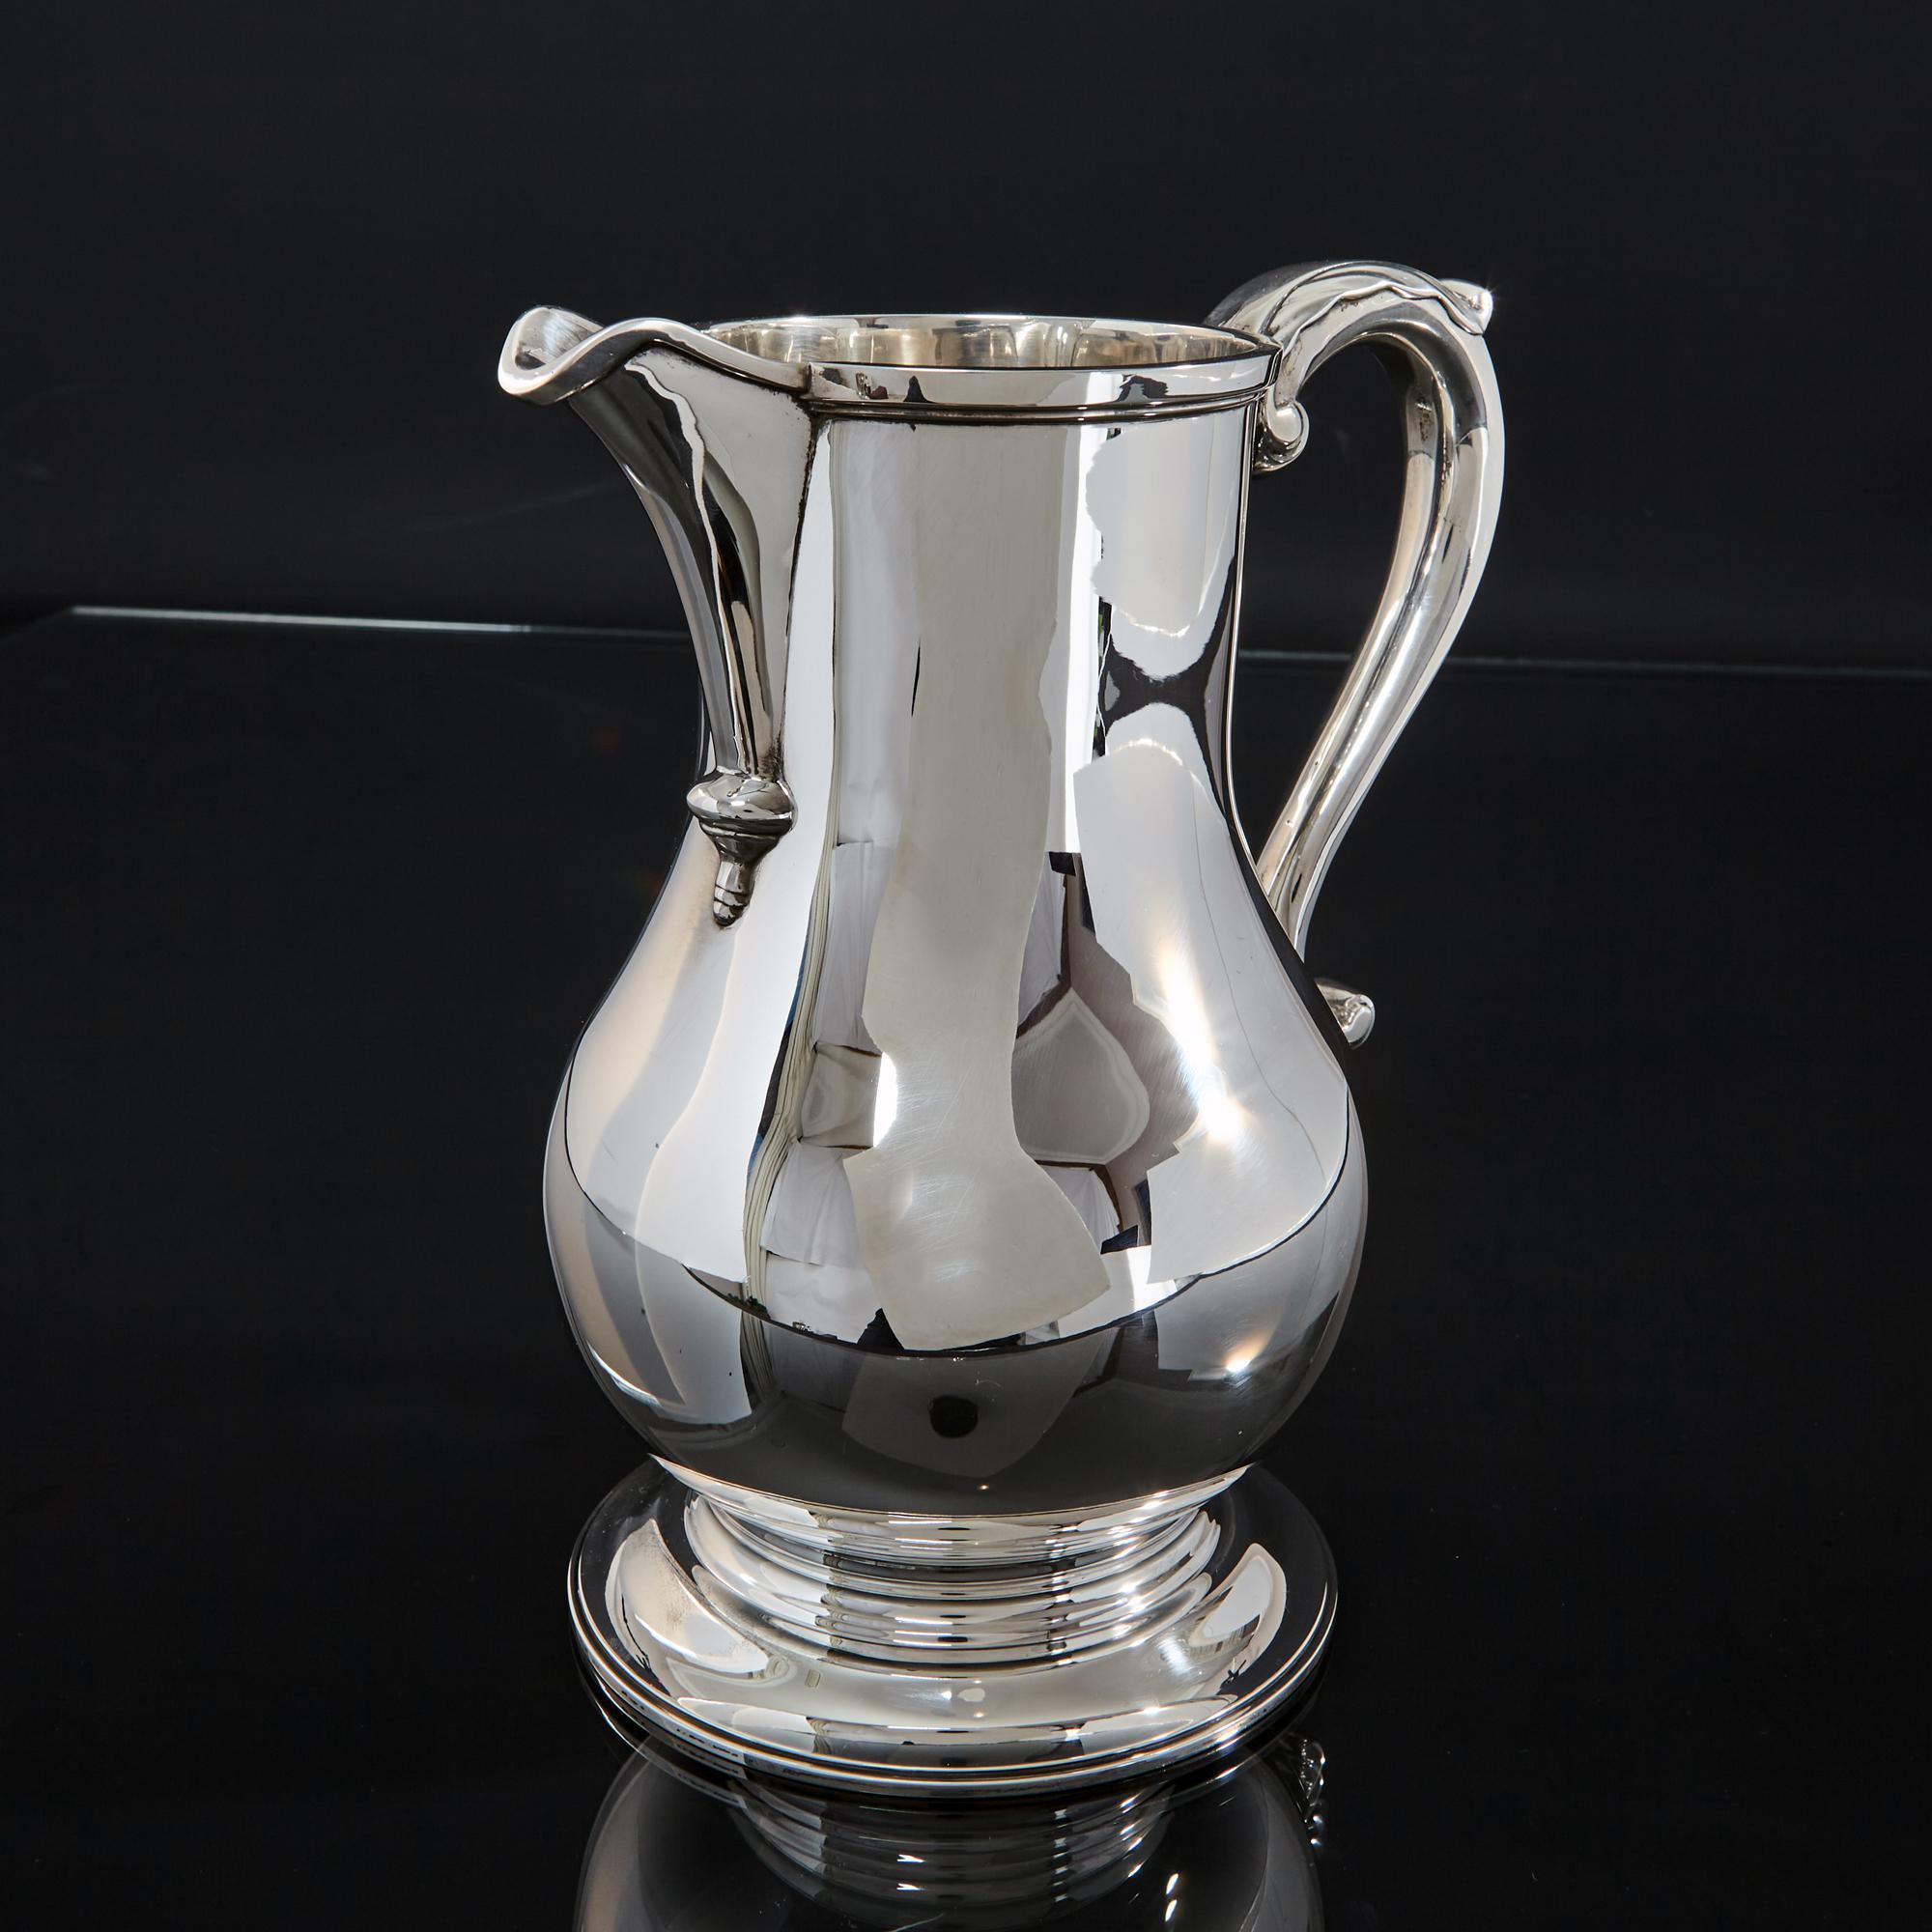 An excellent quality silver water pitcher made in the style of a classic Georgian beer jug. This silver water jug's bellied form on a spreading circular base, and featuring a scroll handle with leaf thumbpiece, are all design elements that personify